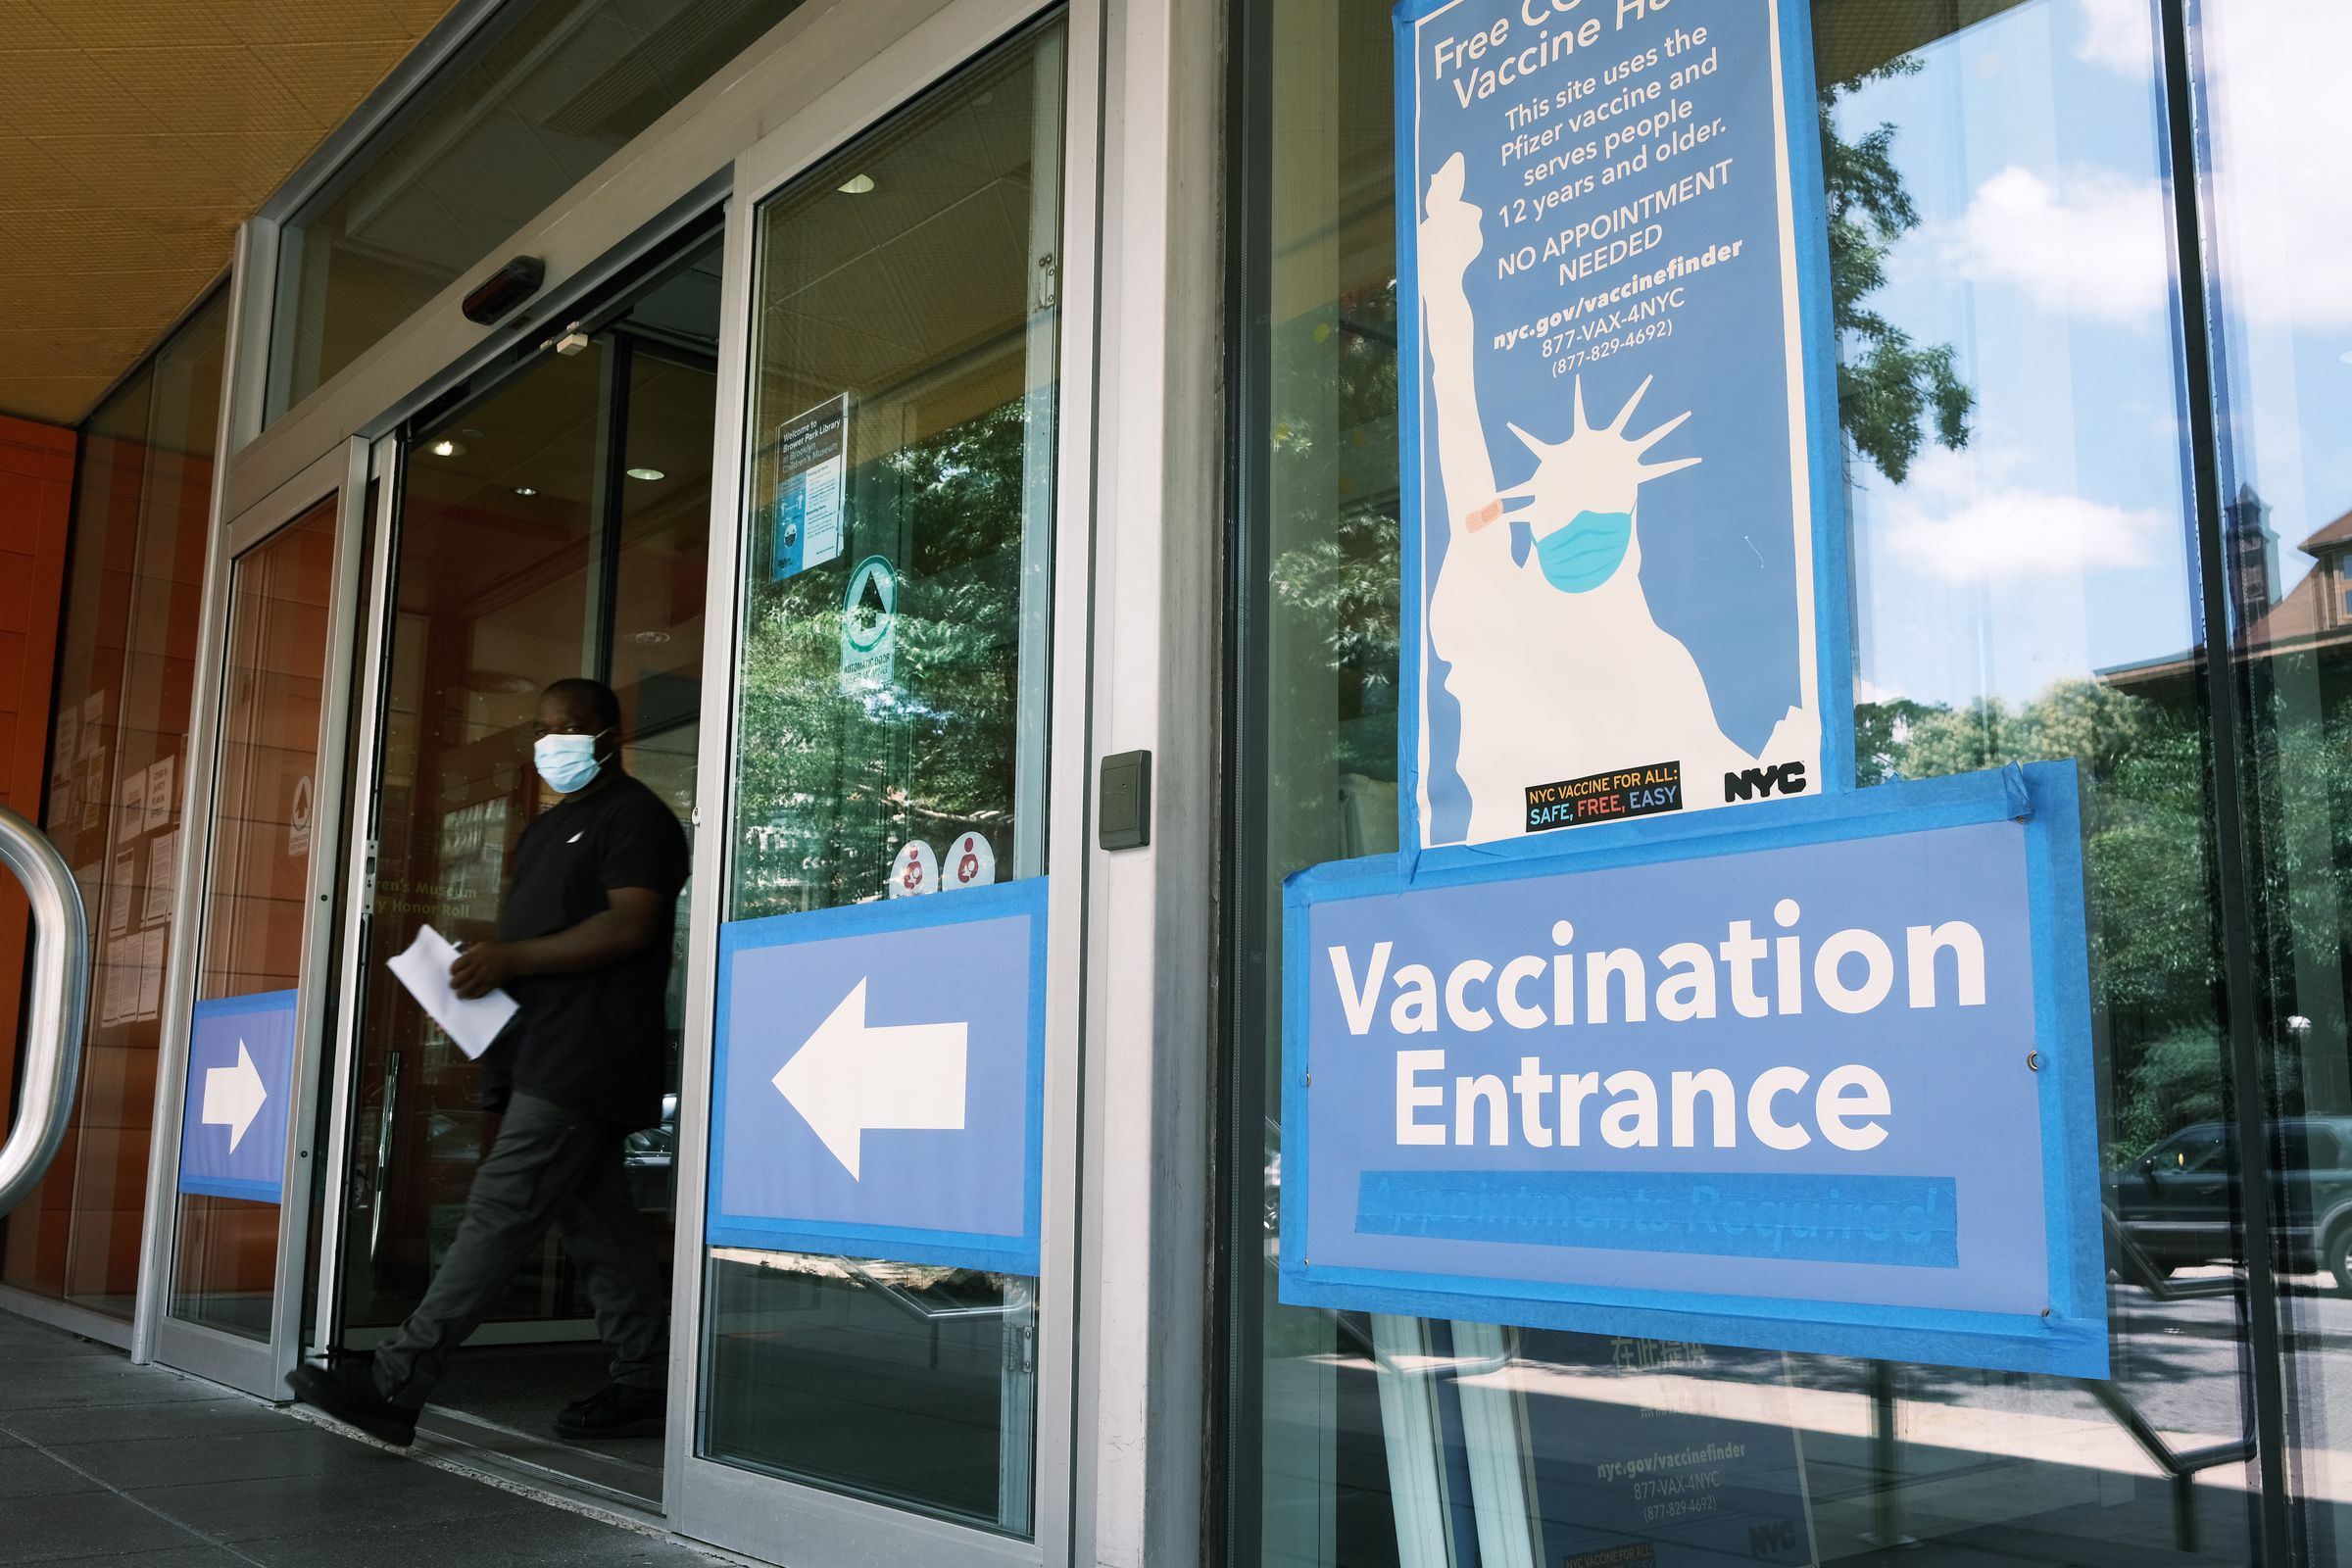 New York City Offers $100 Incentive For New Vaccinations